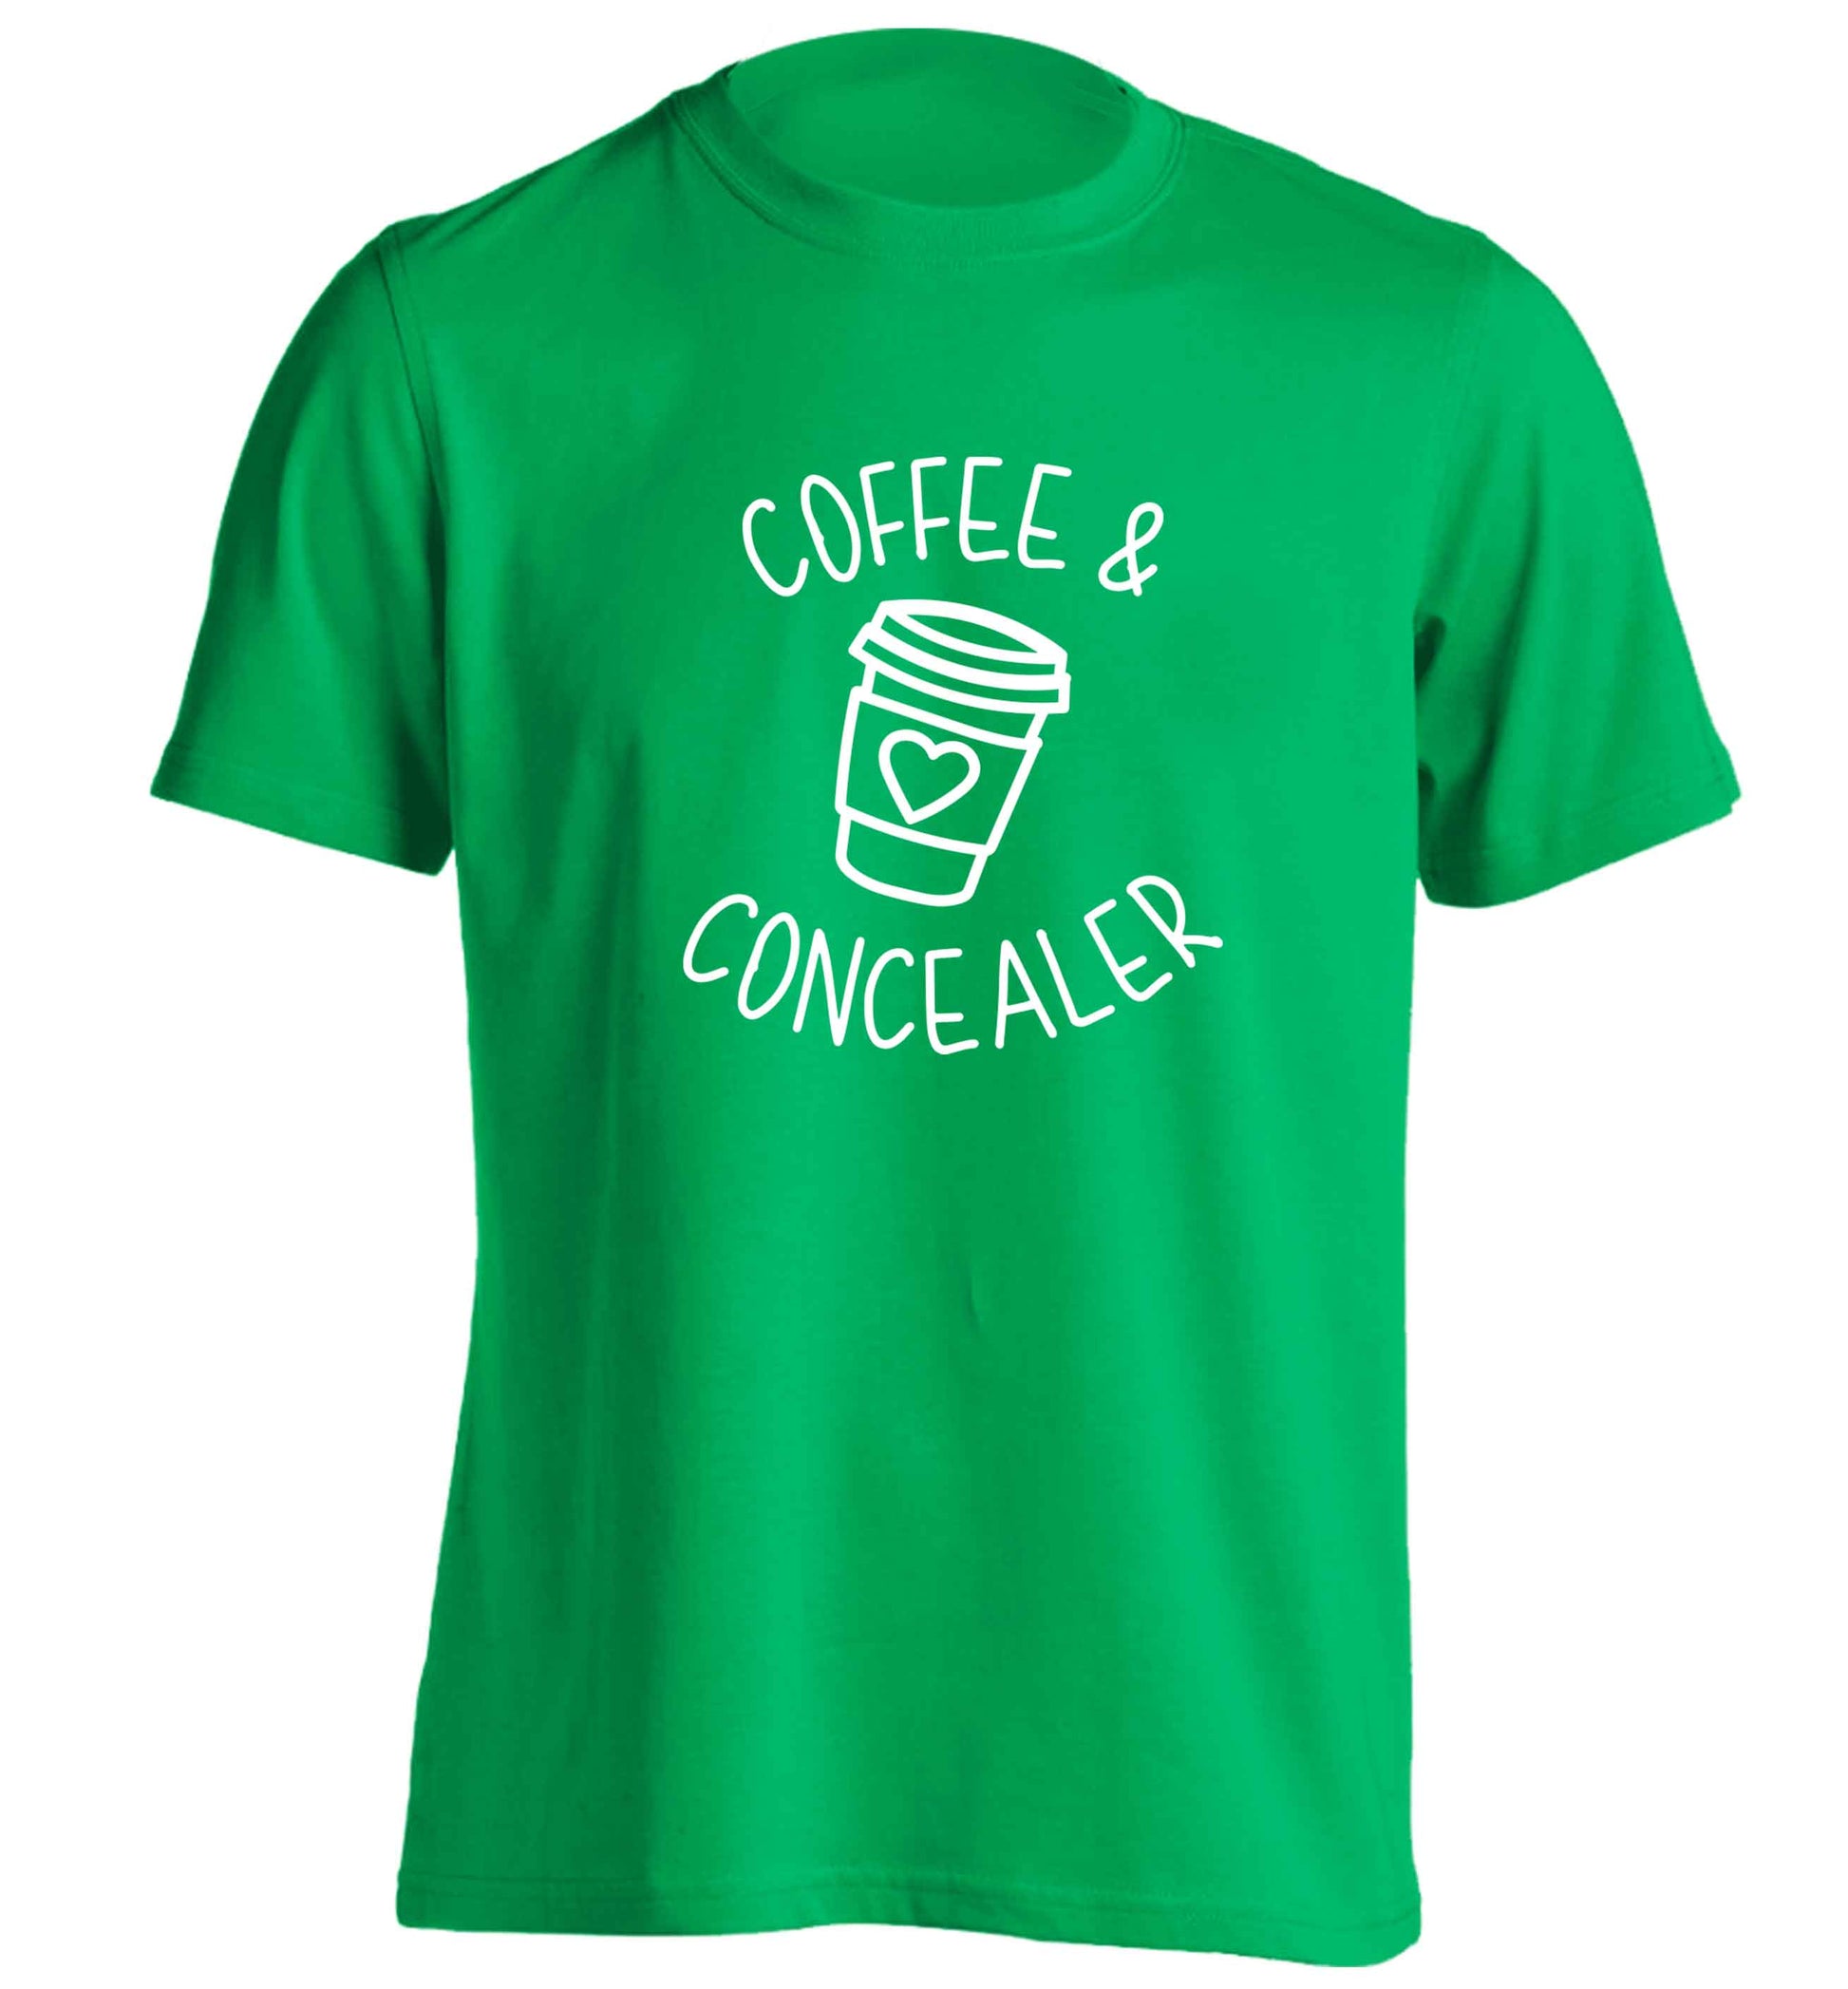 Coffee and concealer adults unisex green Tshirt 2XL